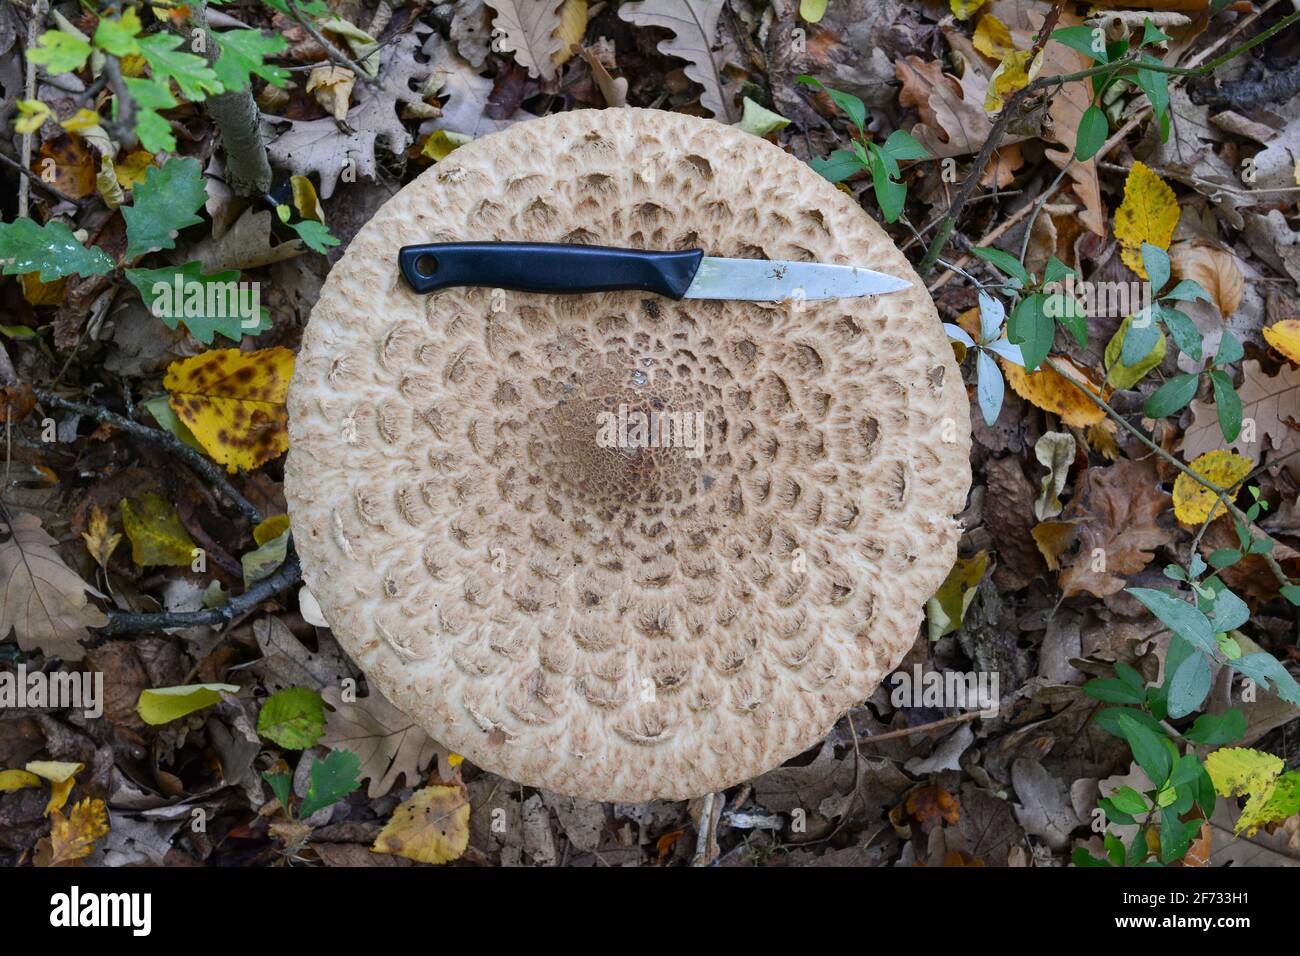 Very big specimen of Macrolepiota procera or Parasol mushroom, size compared to big kitchen knife, top view, natural habitat, autumn time Stock Photo